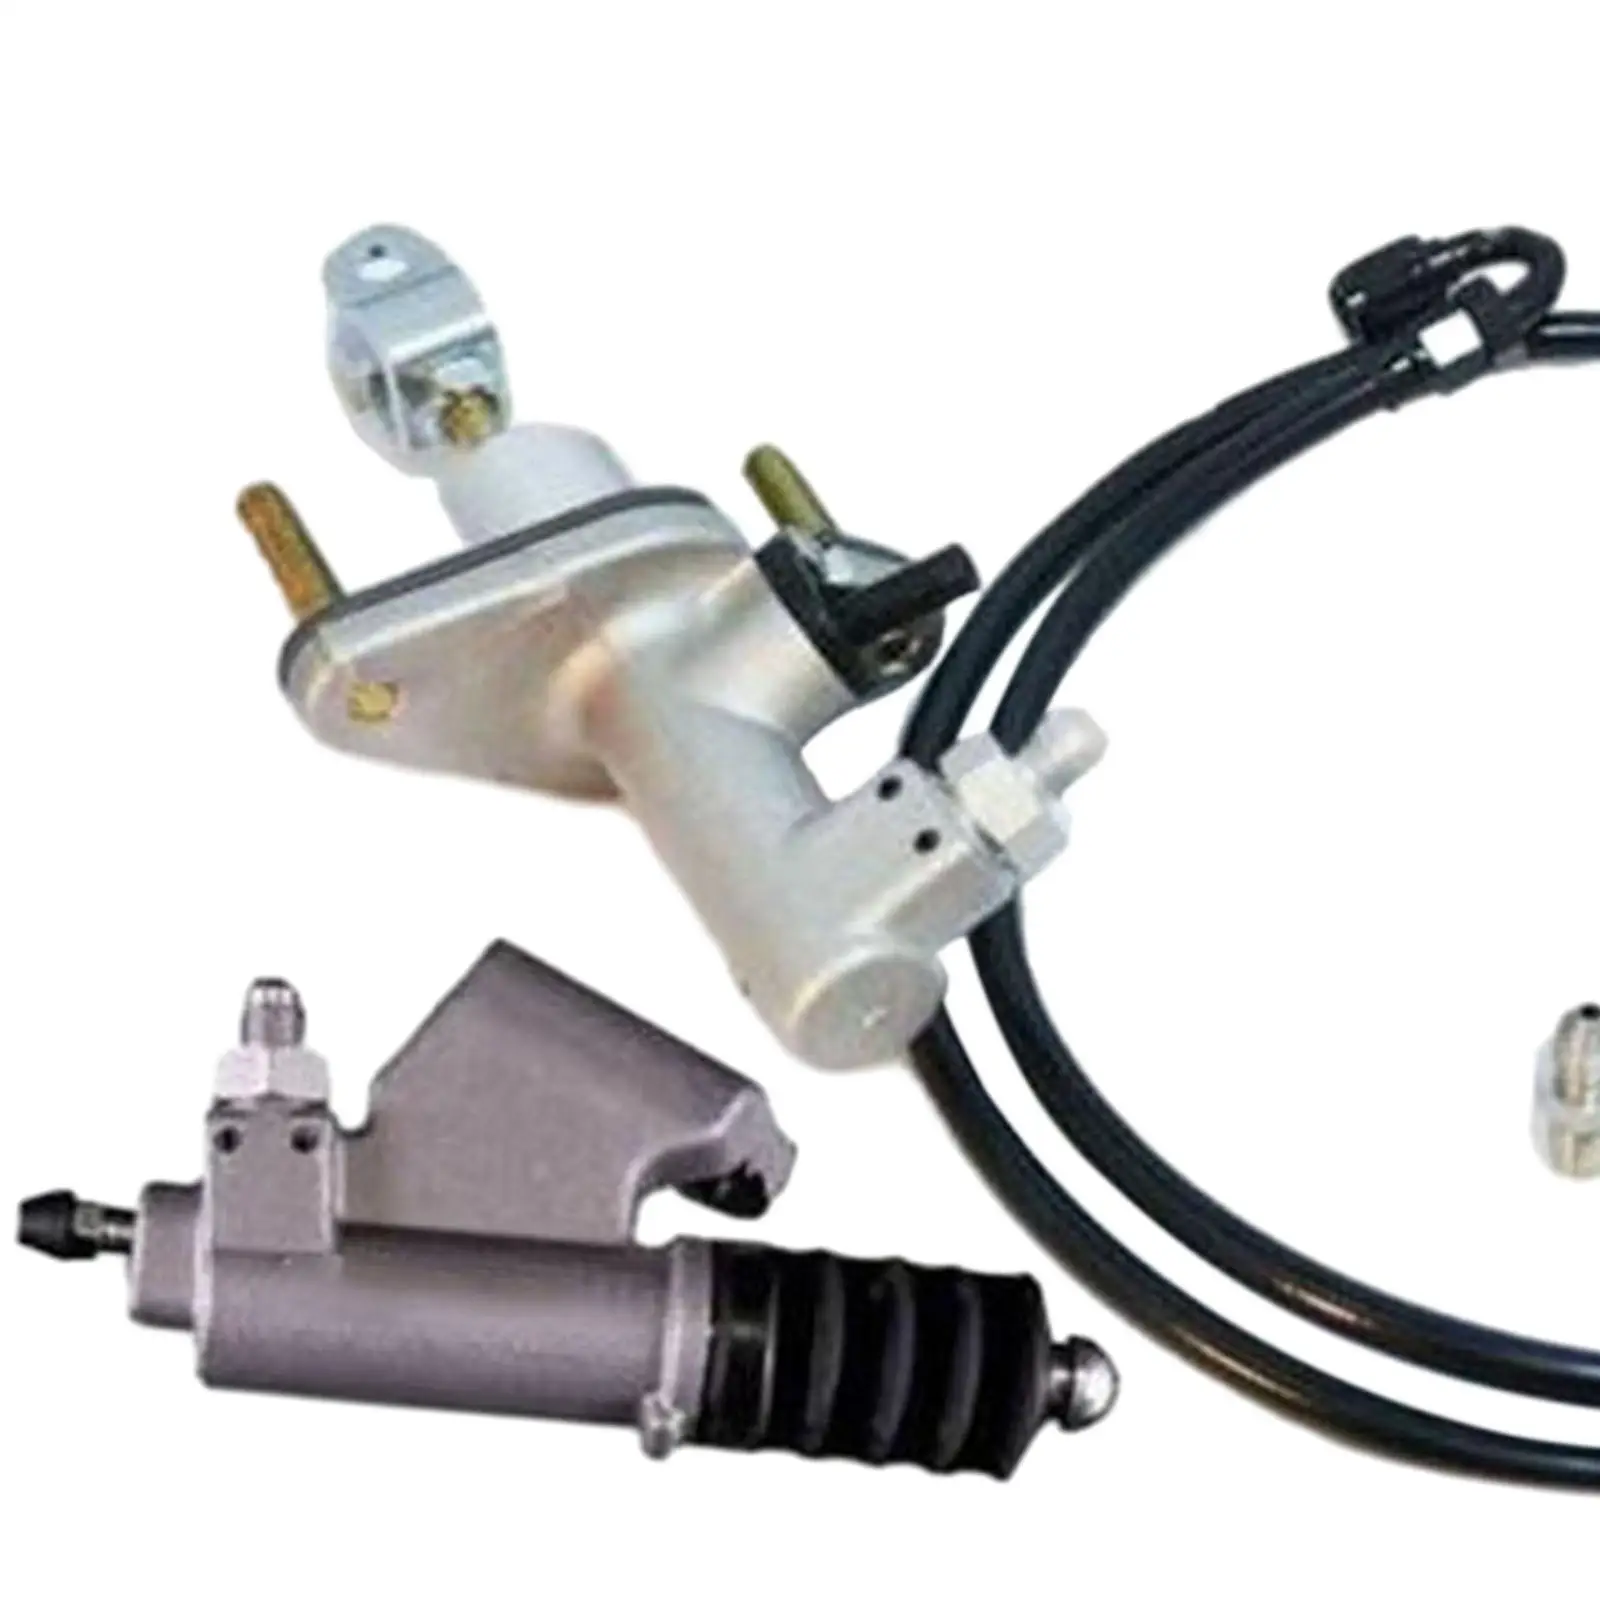 Ktd-clk-kms Complete Master Cylinder Slave Kit for Acura Assembly Automobile